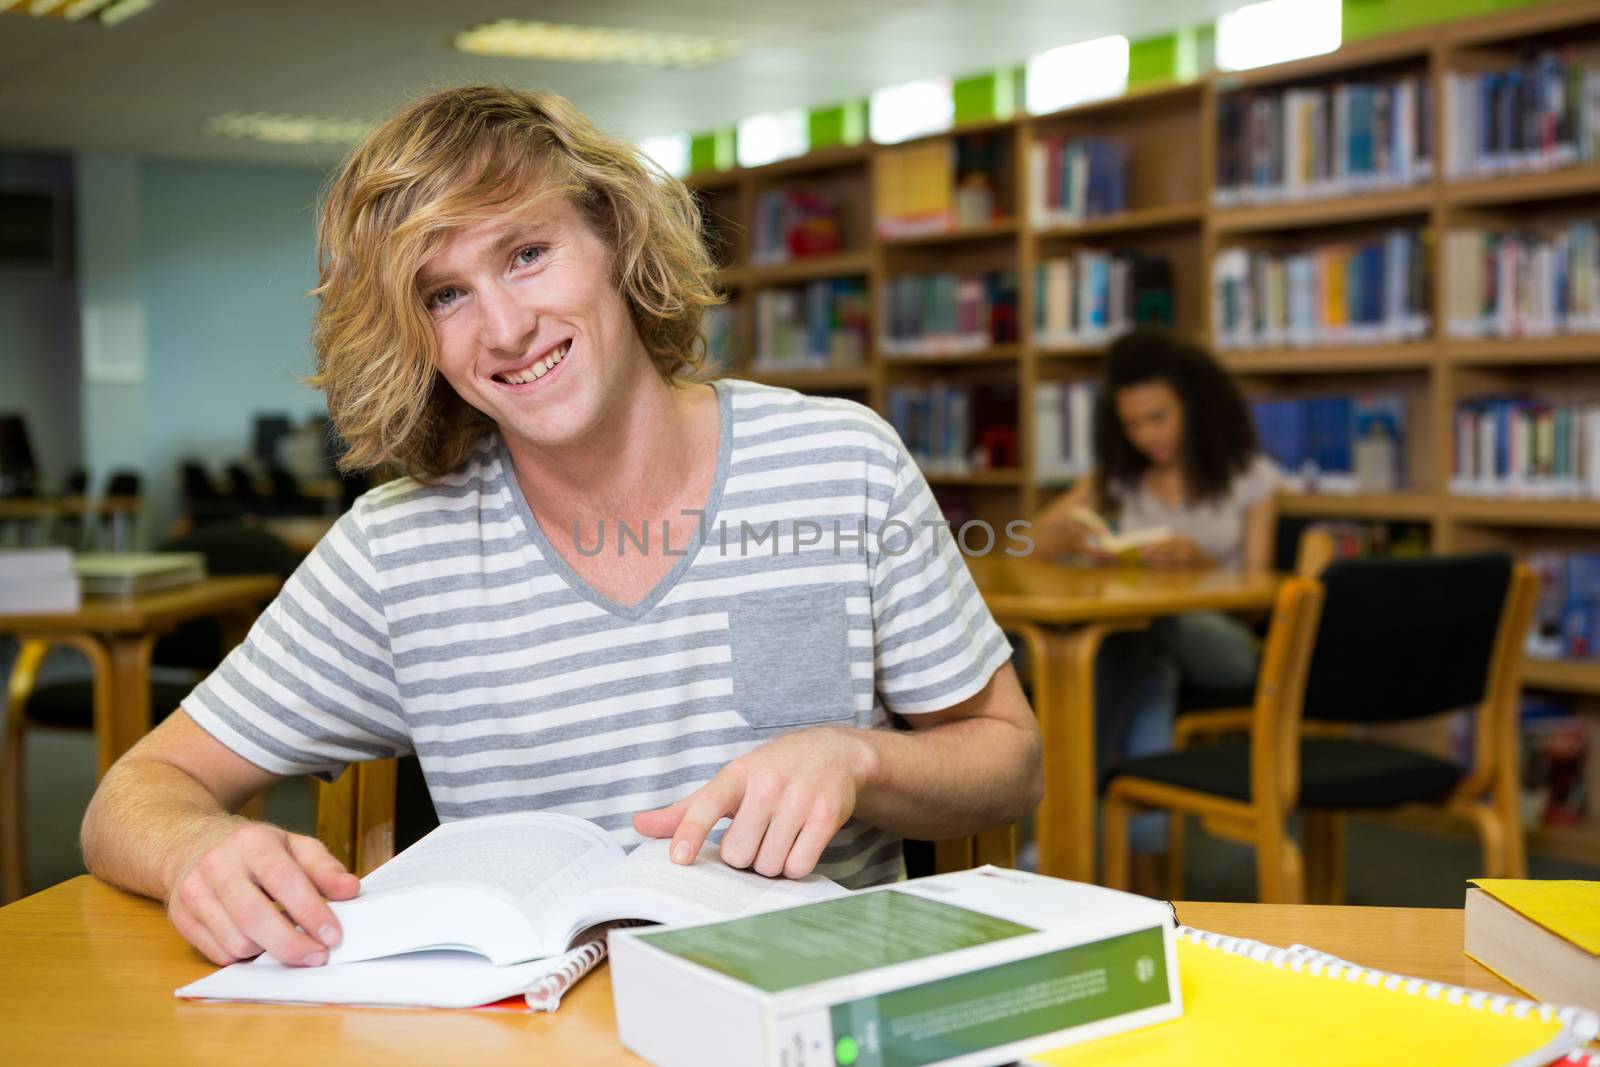 Student studying in the library  by Wavebreakmedia